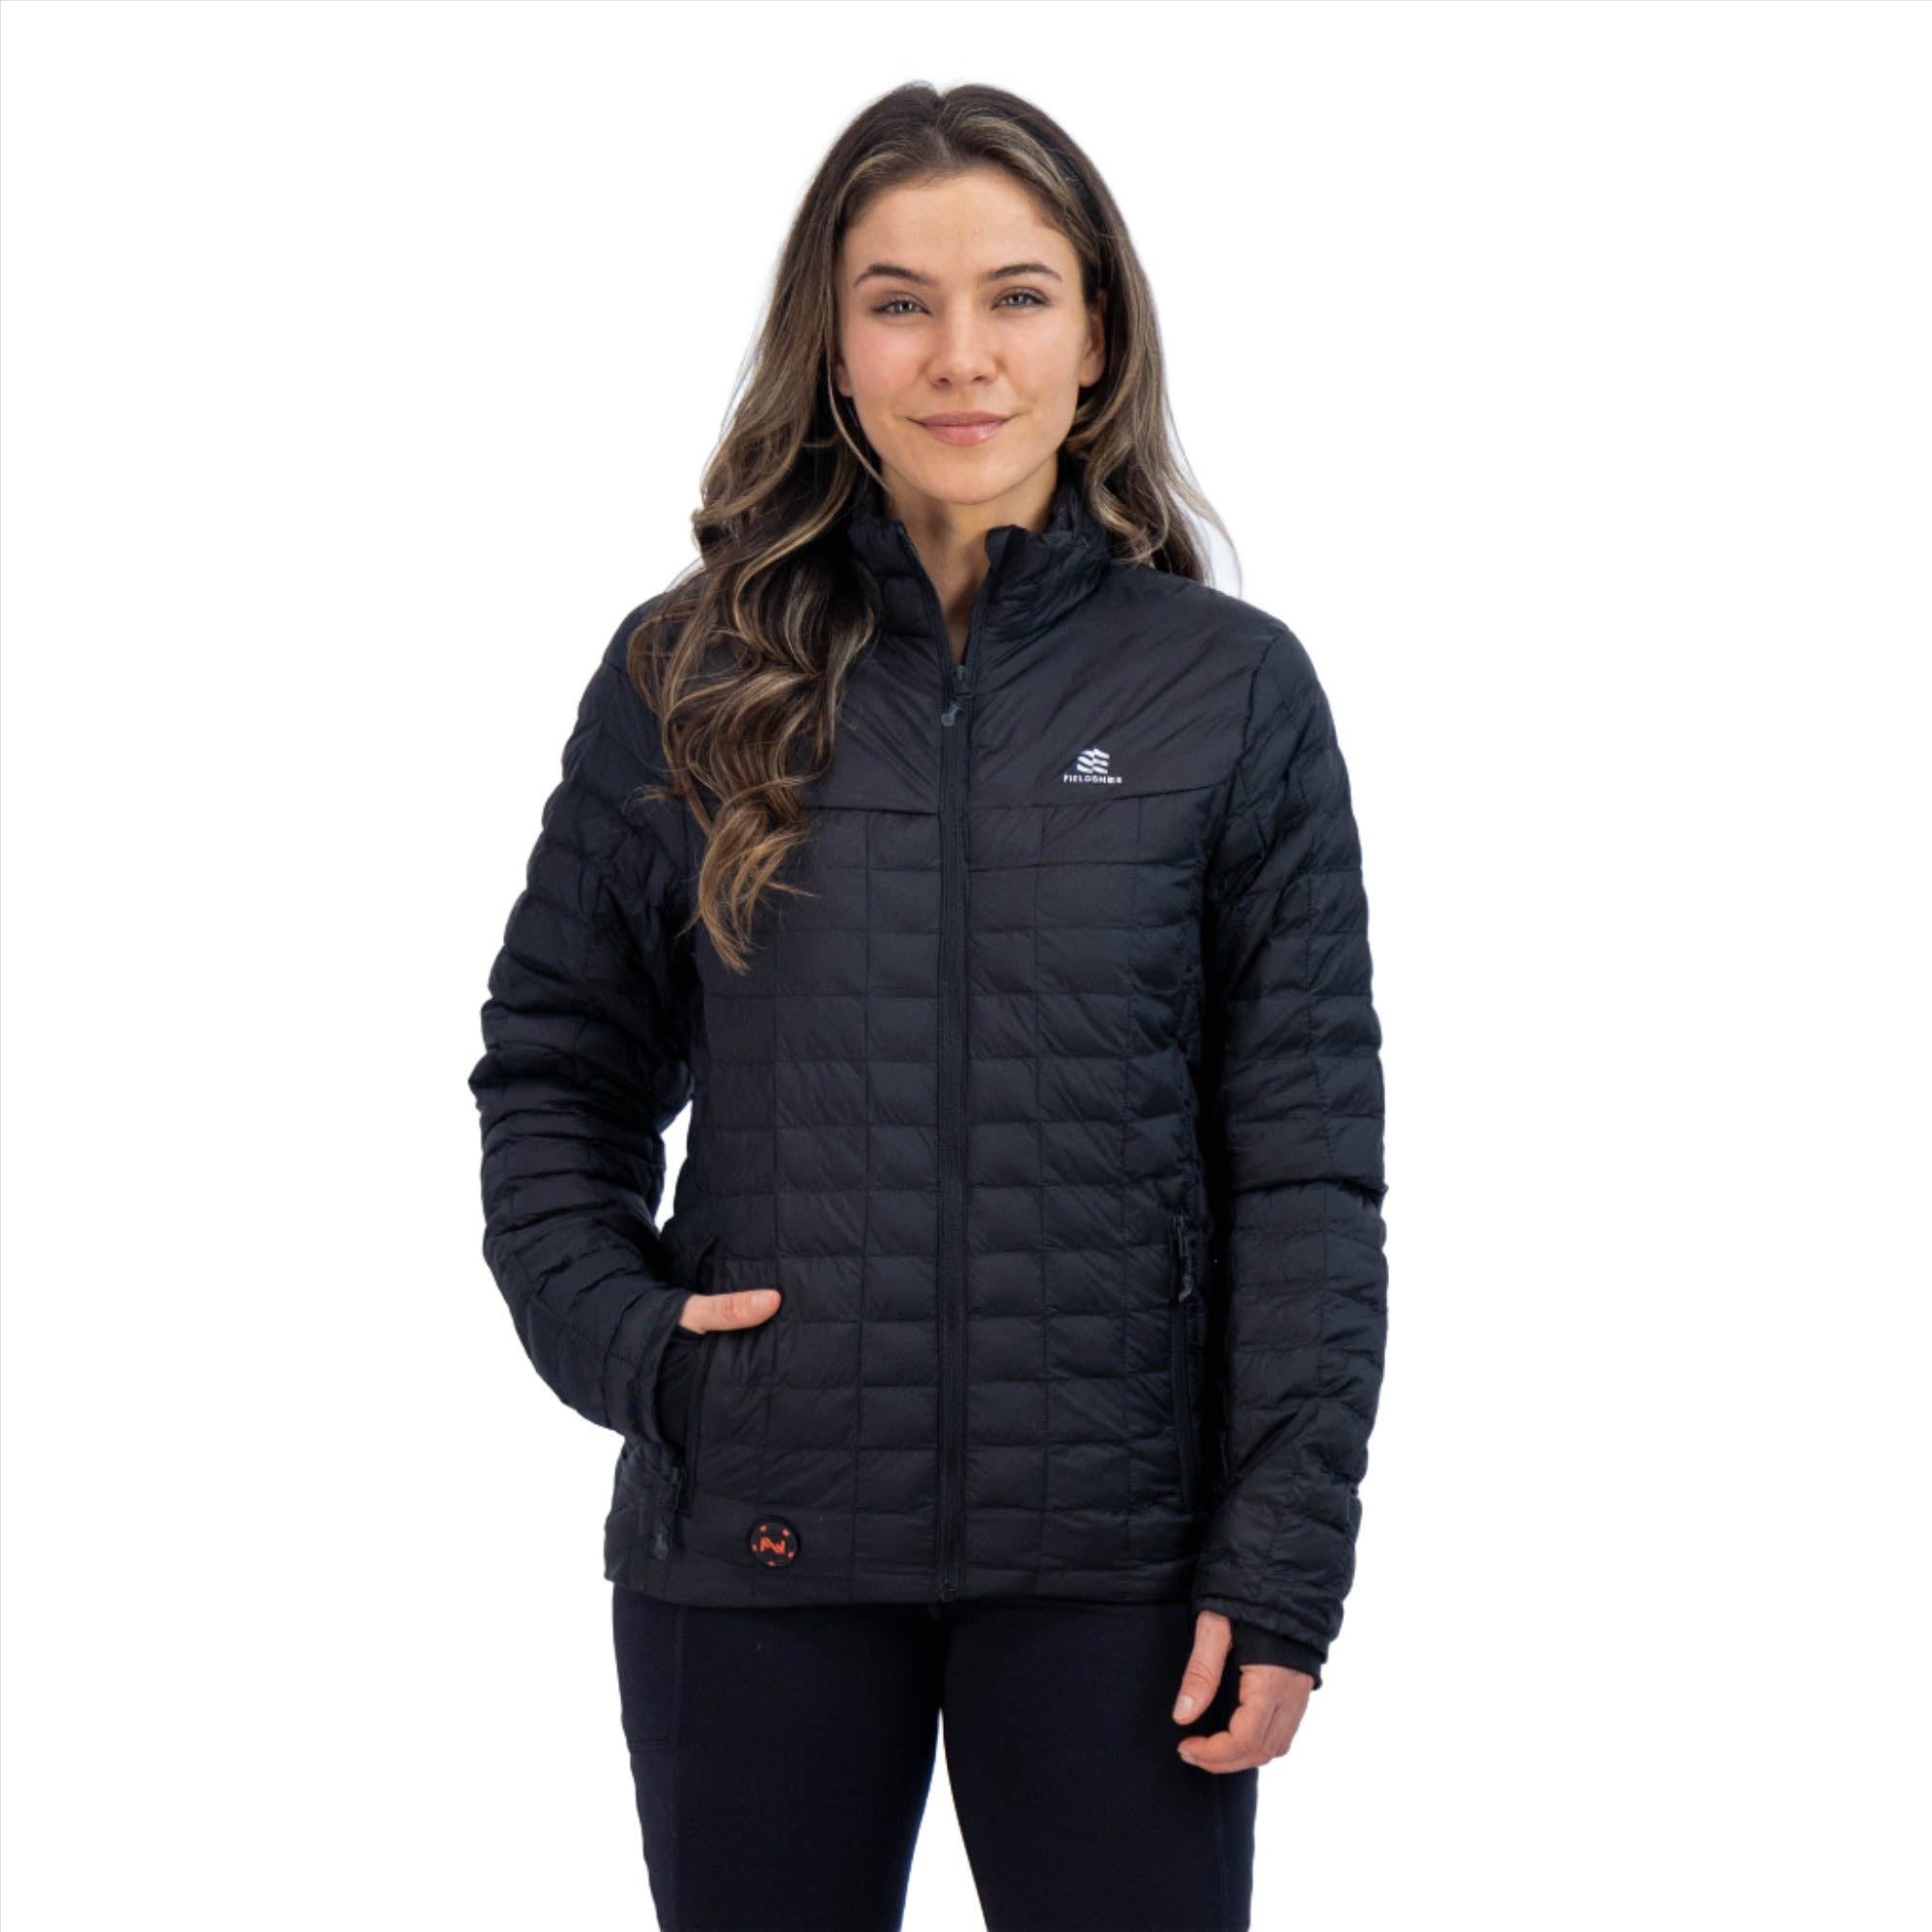 JDEFEG Jacket with Zipper for Women Via Fishing Skiing Heated for